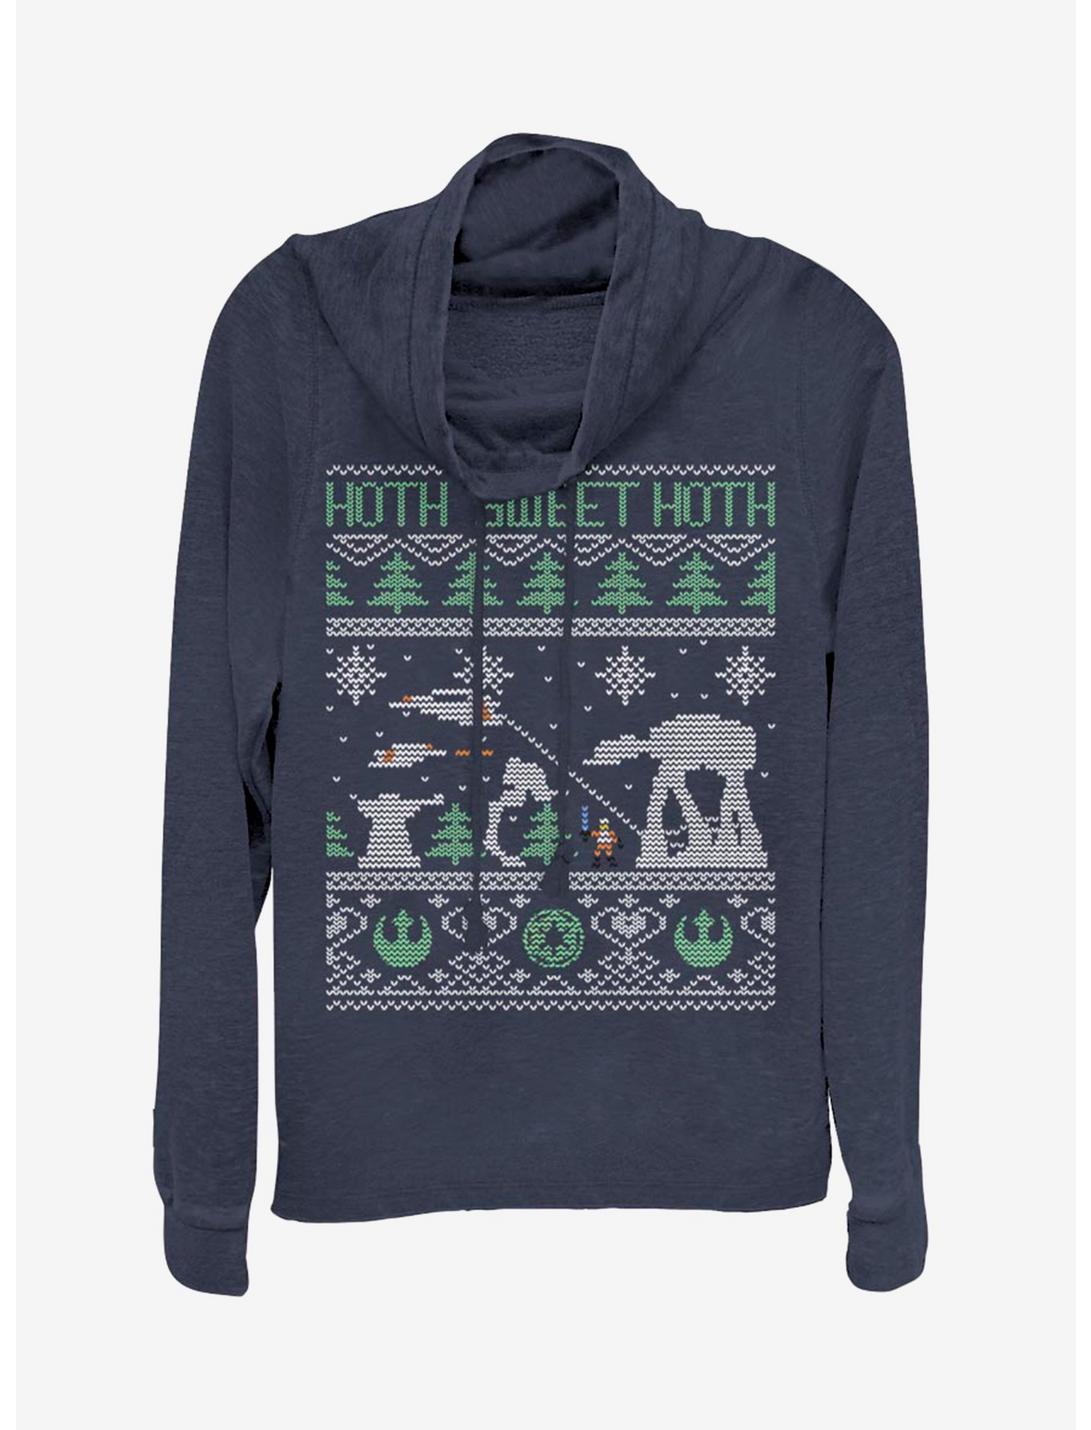 Star Wars Holiday Battle Christmas Pattern Cowlneck Long-Sleeve Womens Top, NAVY, hi-res